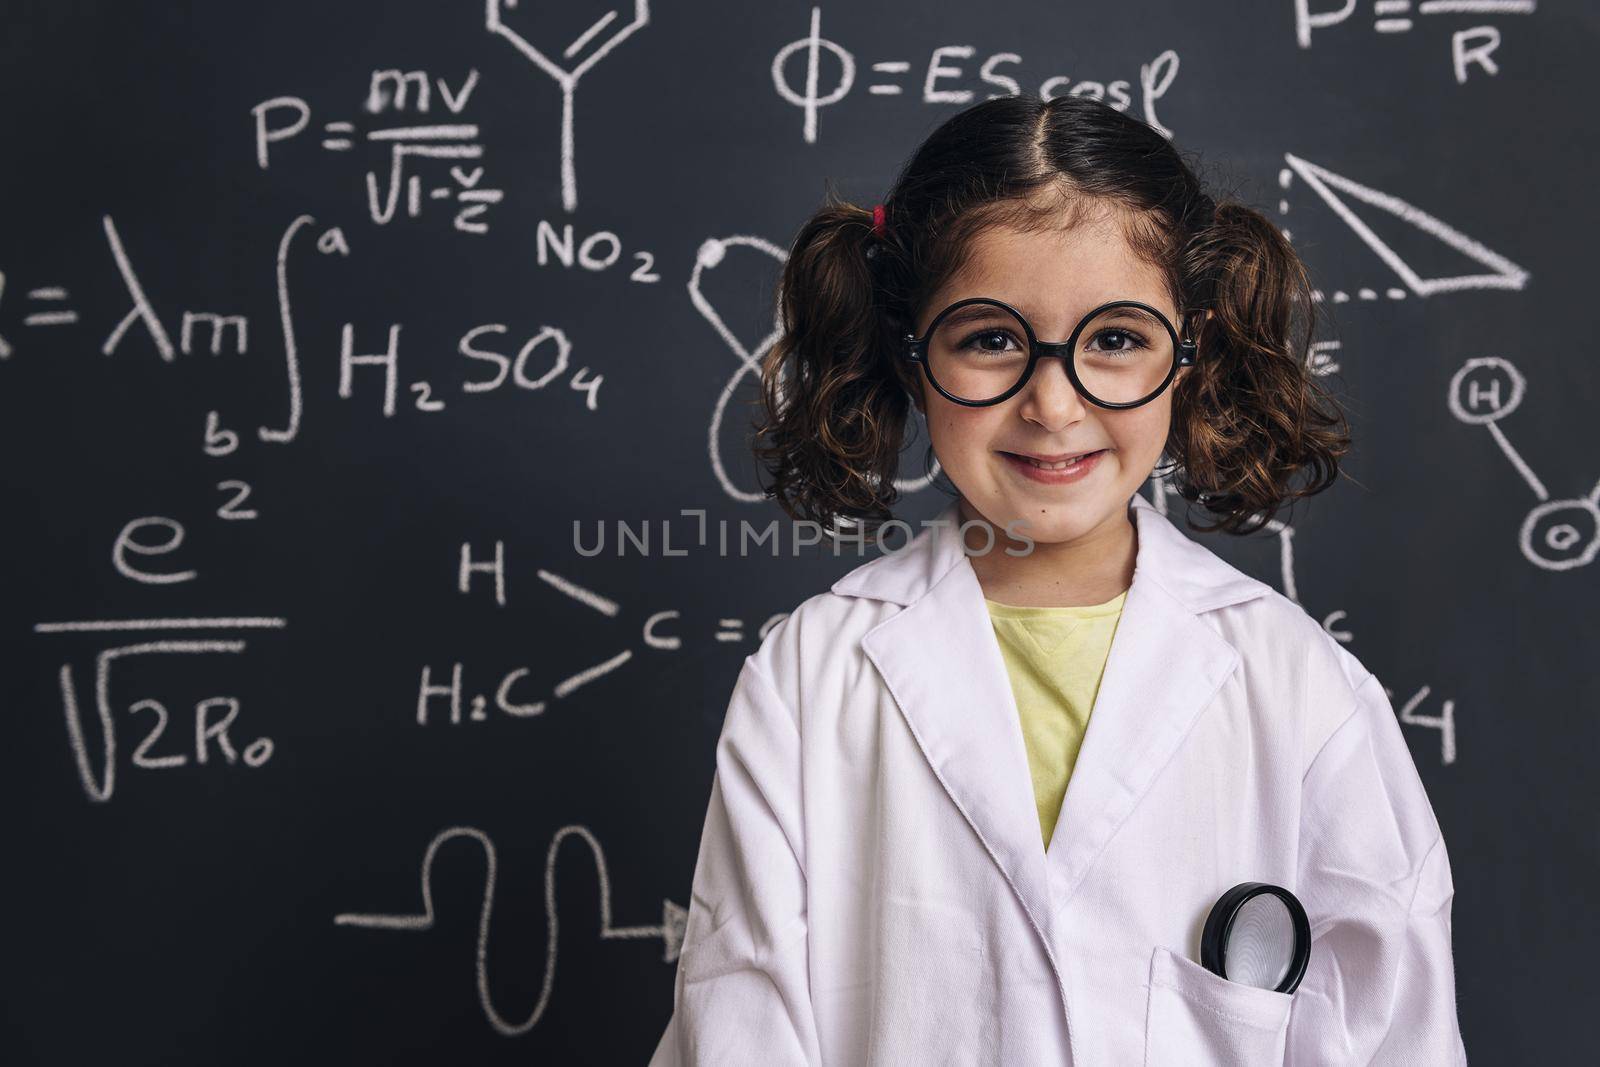 cheerful little girl science student with glasses in lab coat smiles on school blackboard background with hand drawings science formula pattern, back to school and successful female career concept